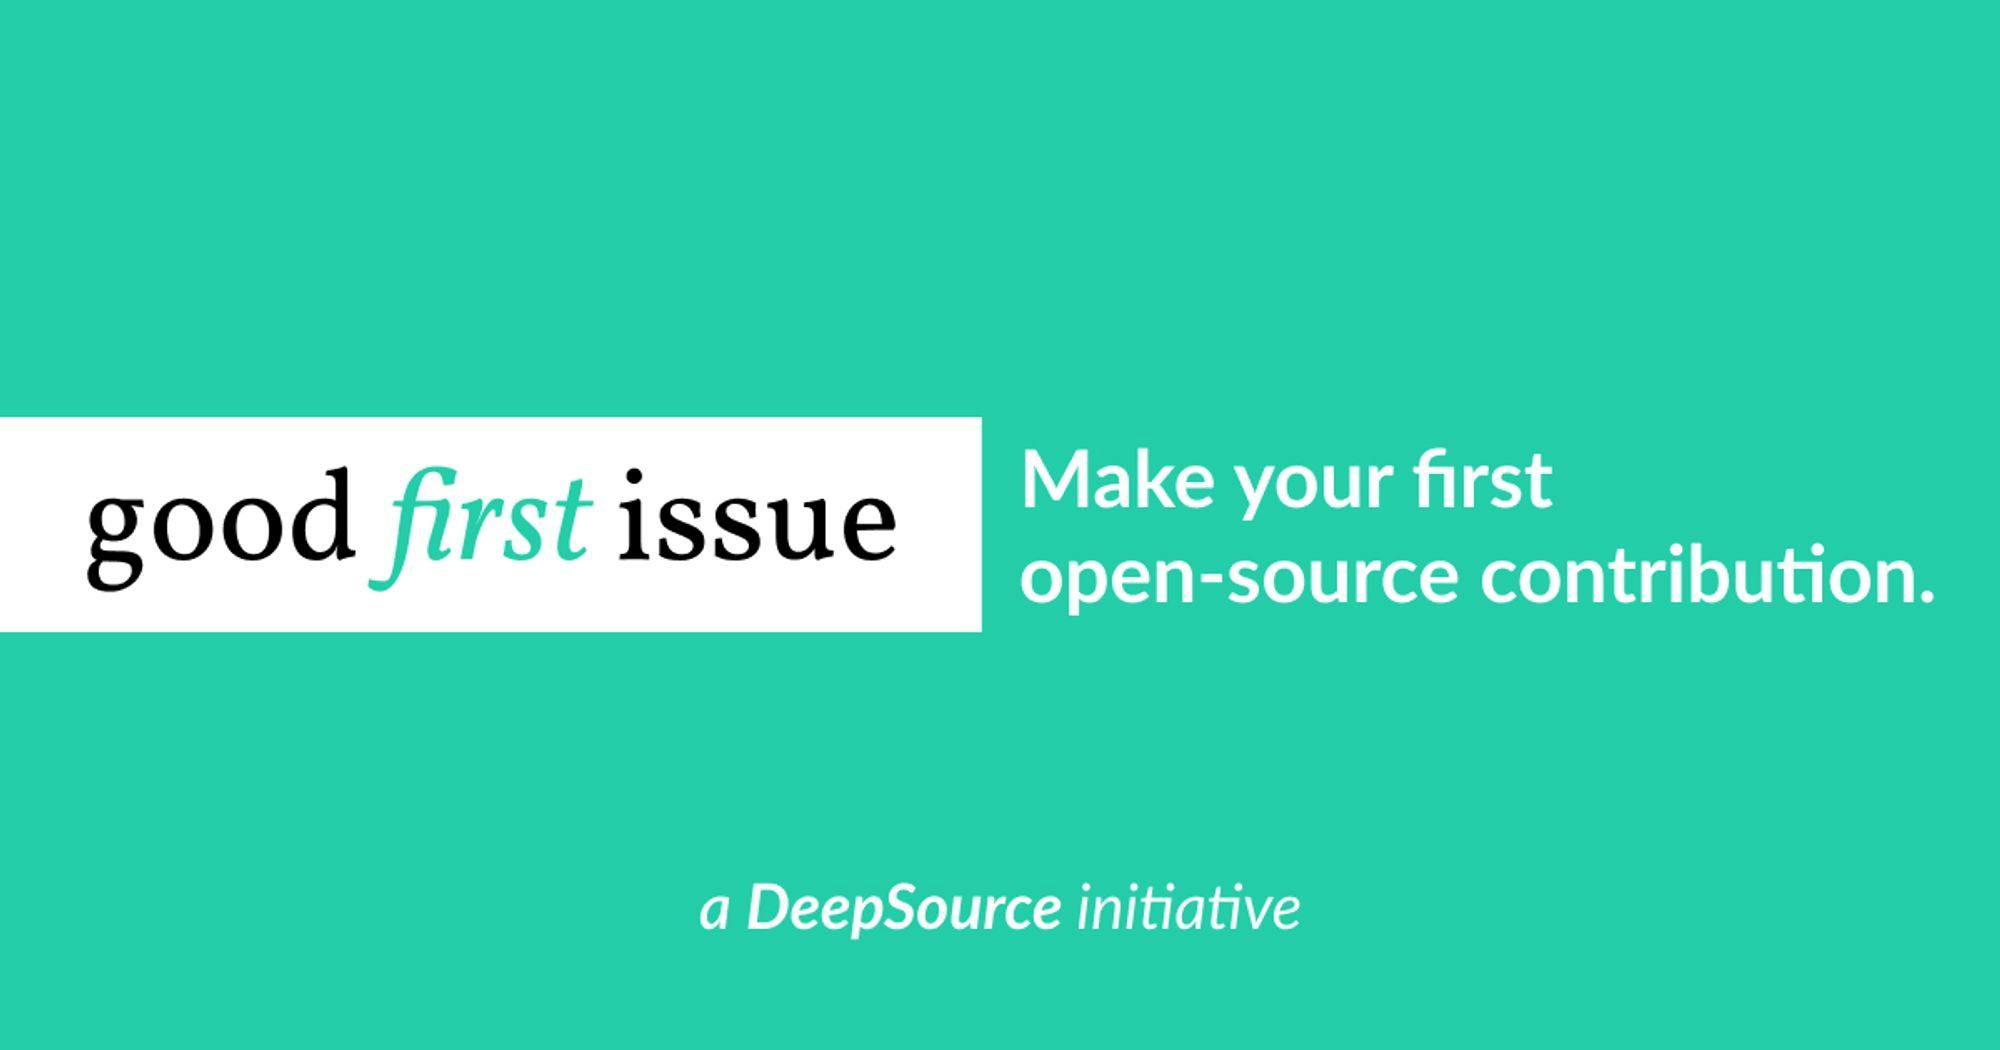 Good First Issue: Issues for your first open-source contribution